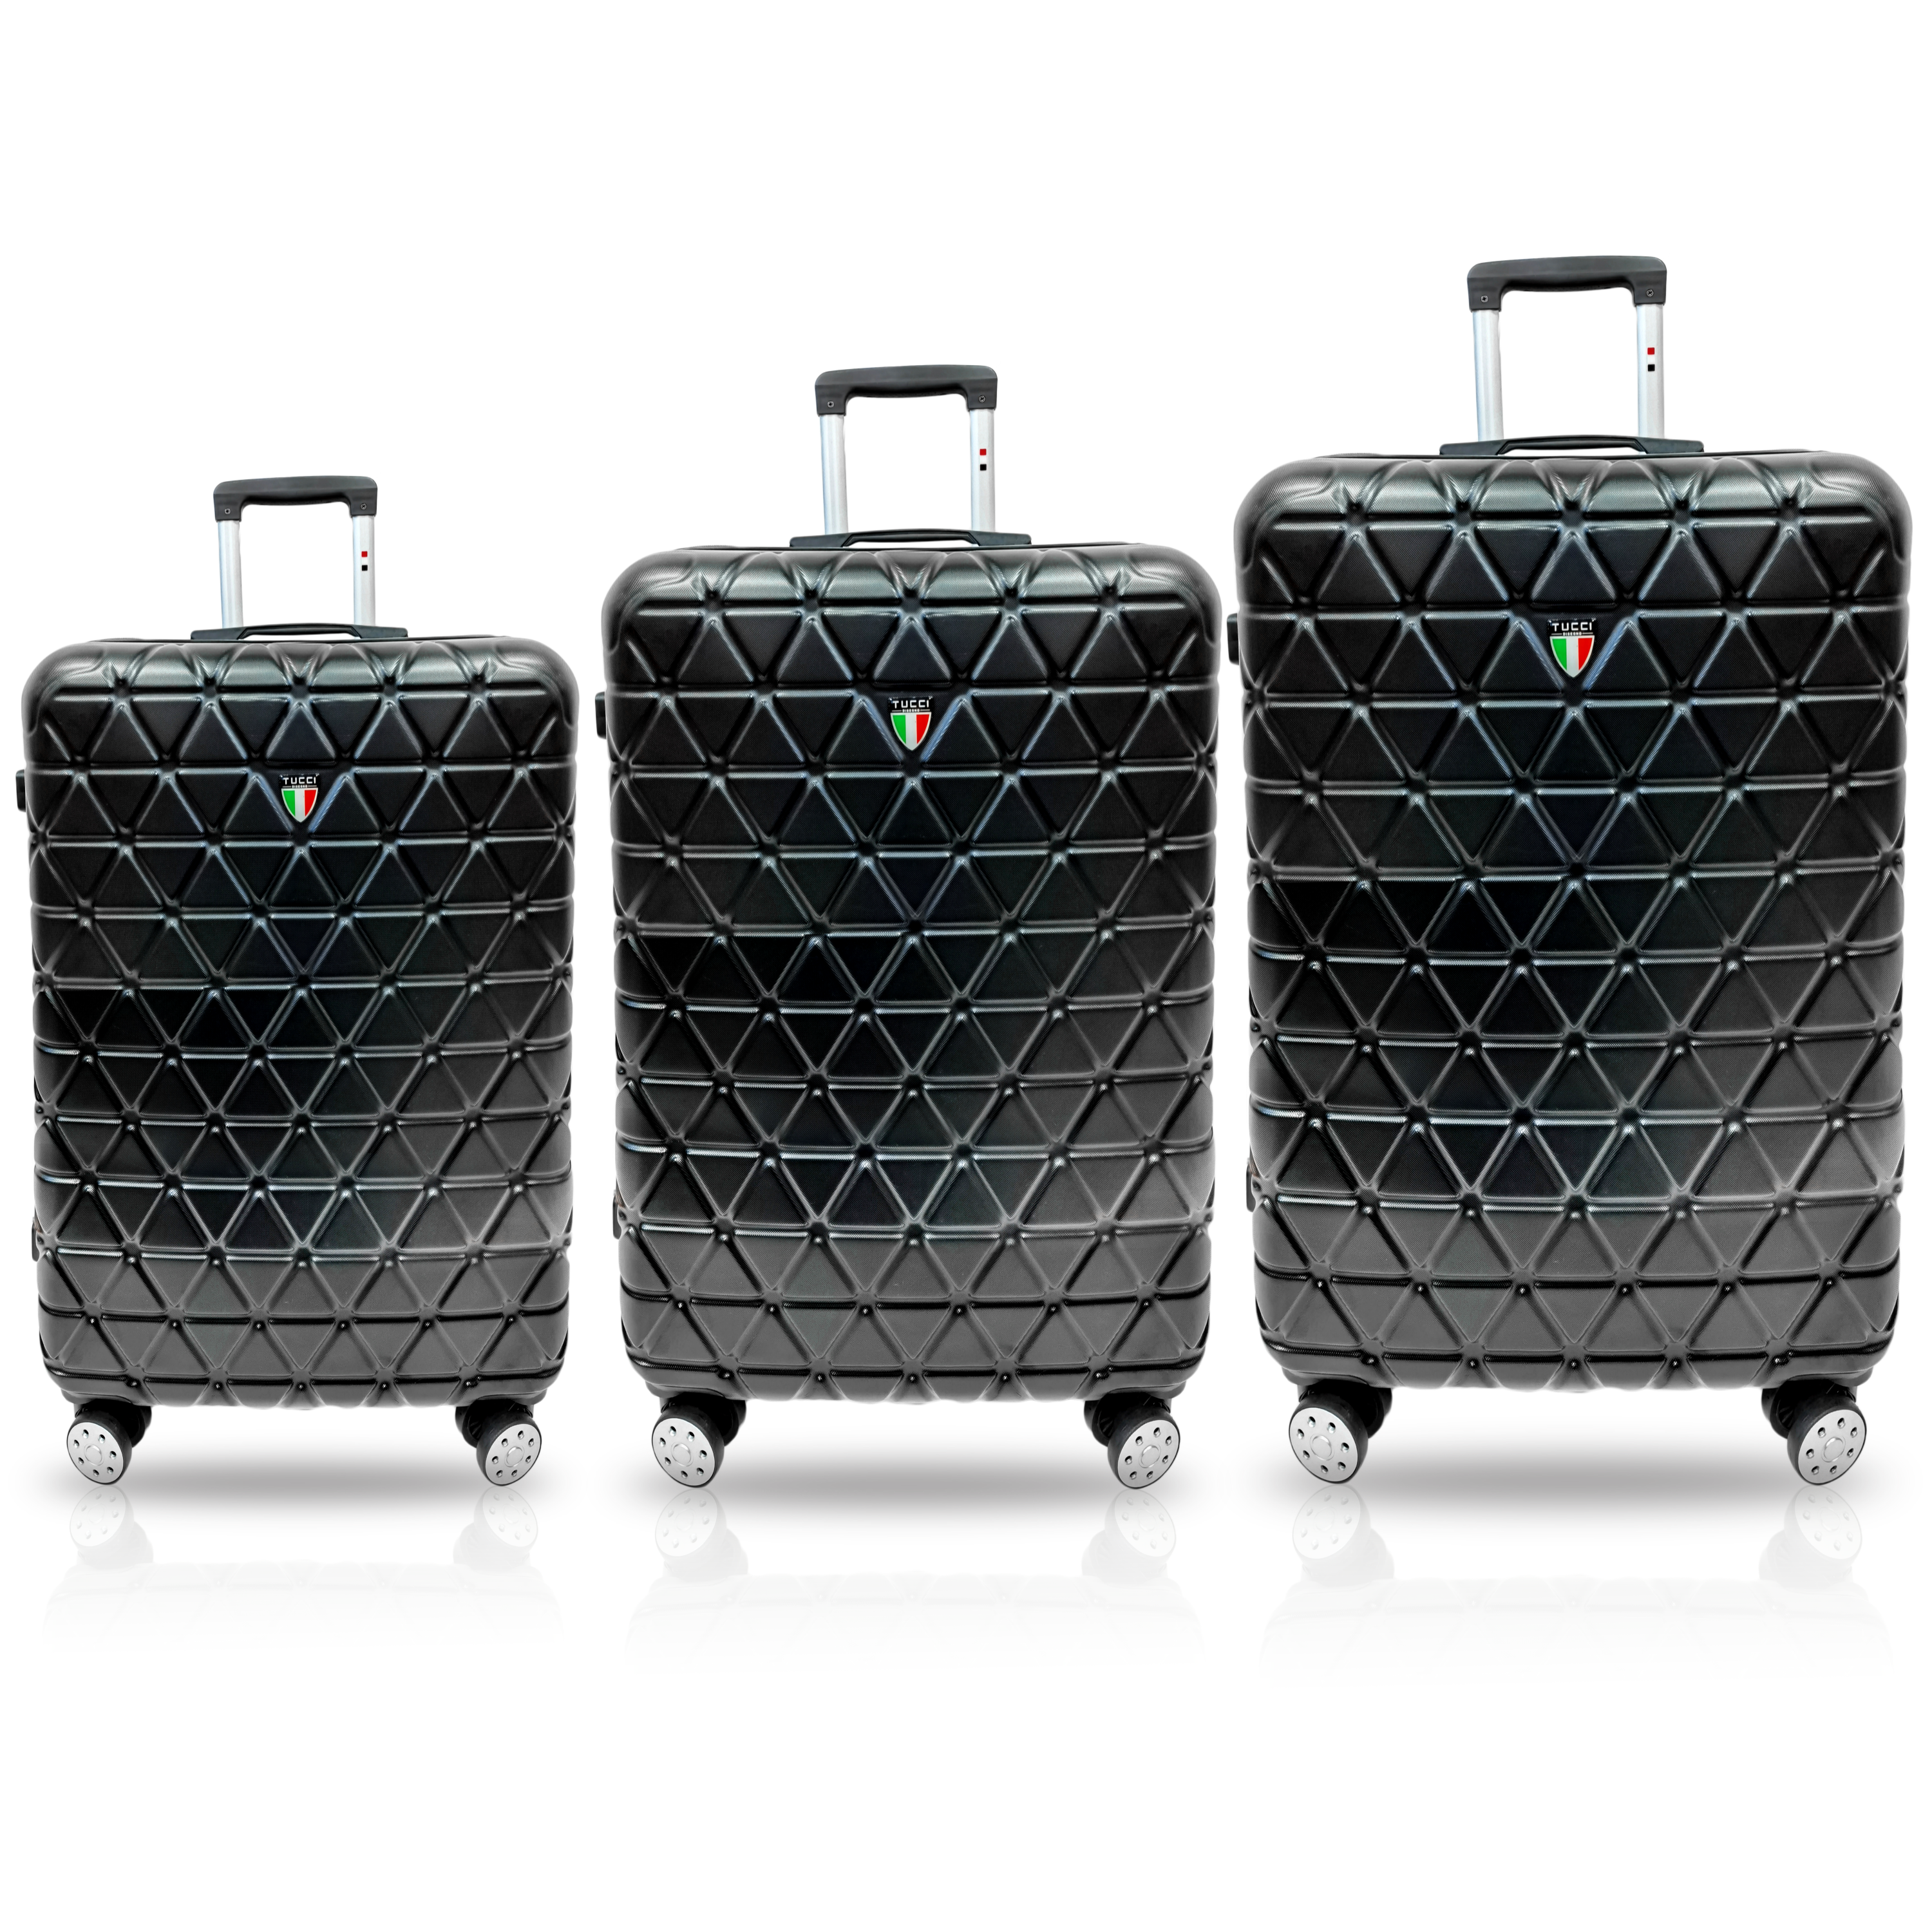 TUCCI Italy TESSERE ABS 3 PC (20", 24", 28") Luggage Set